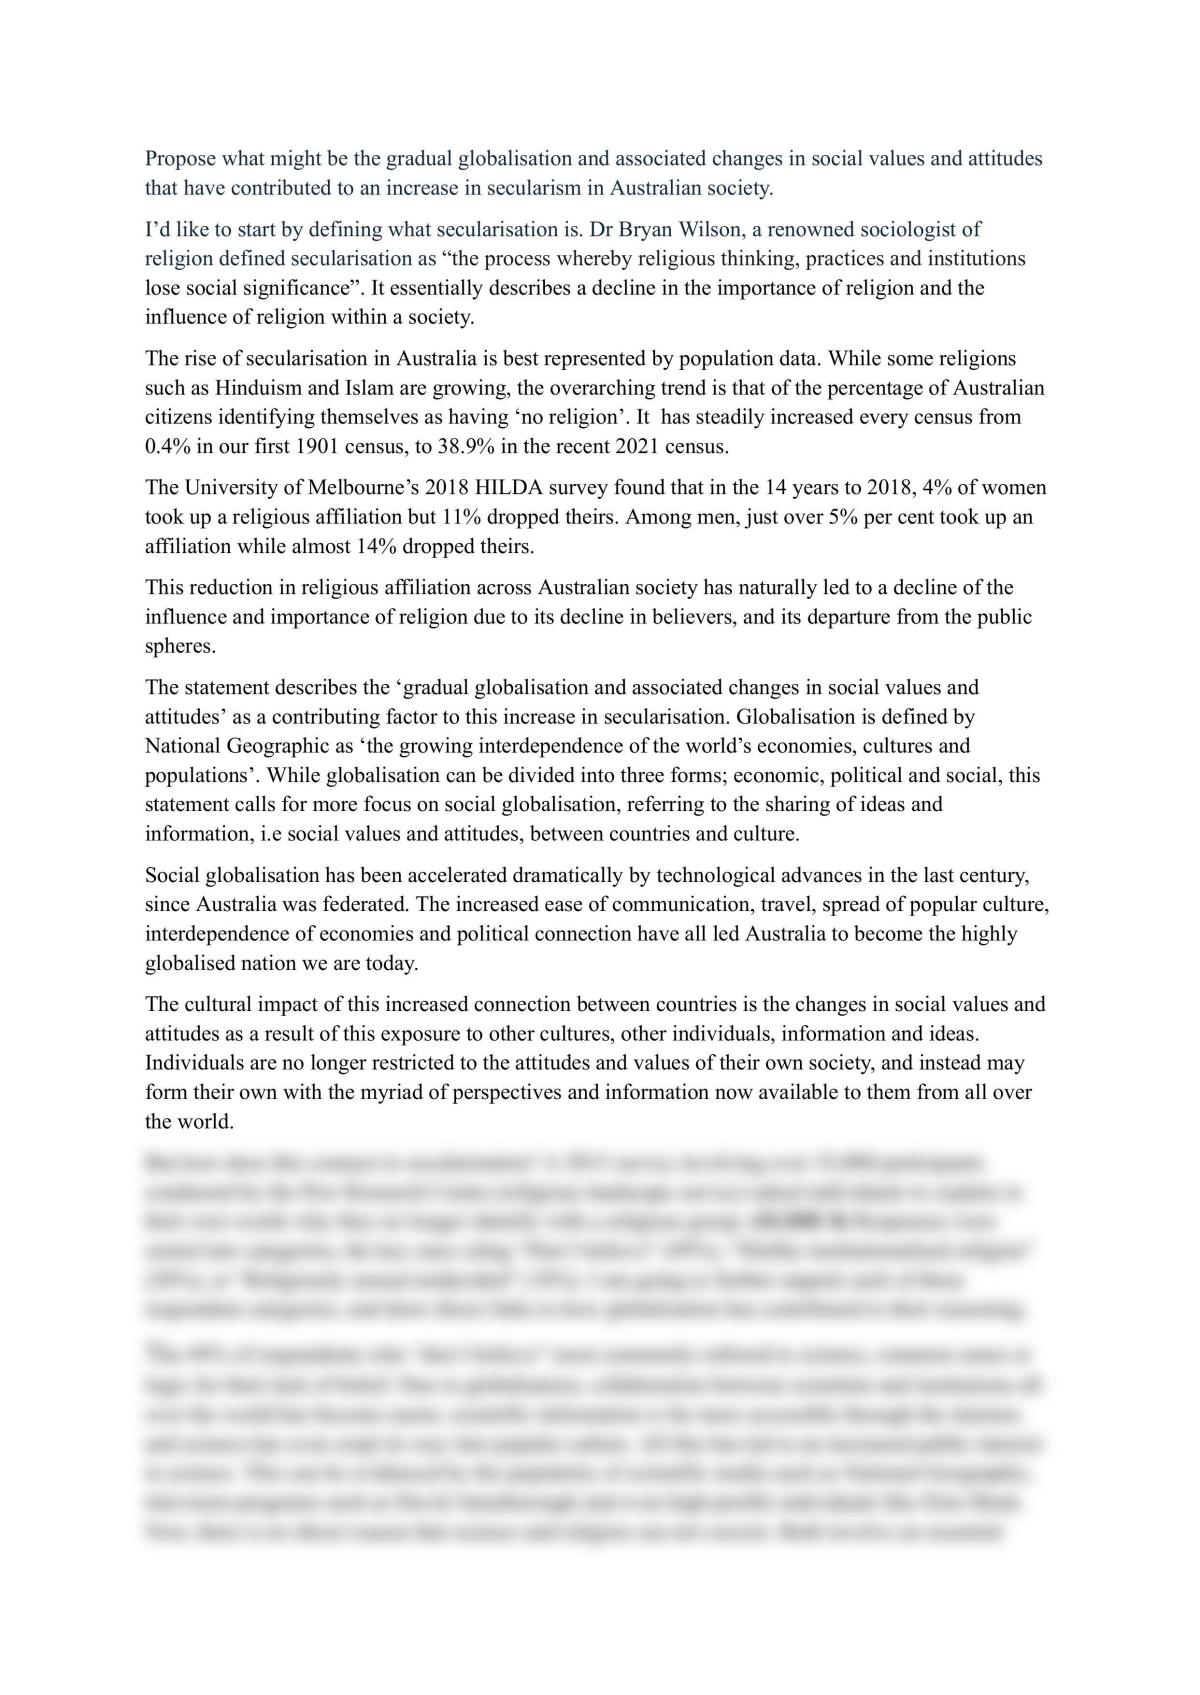 Speech on the increased secularisation of Australian society.  - Page 1